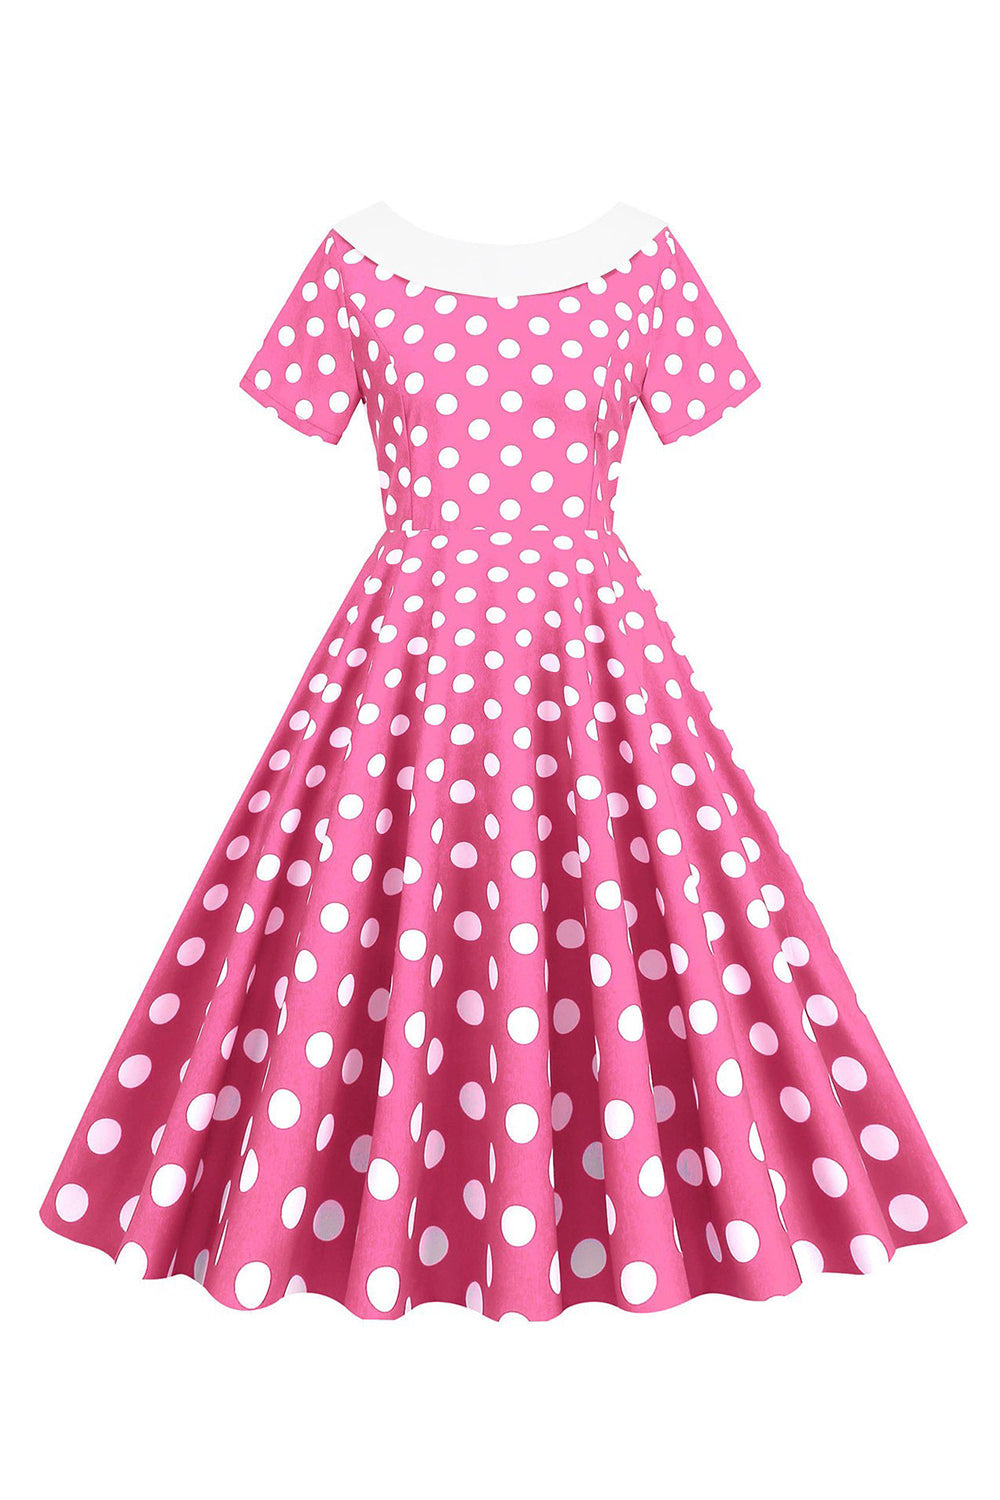 Pink Polka Dots Boat Neck 1950s Dress With Bowknot